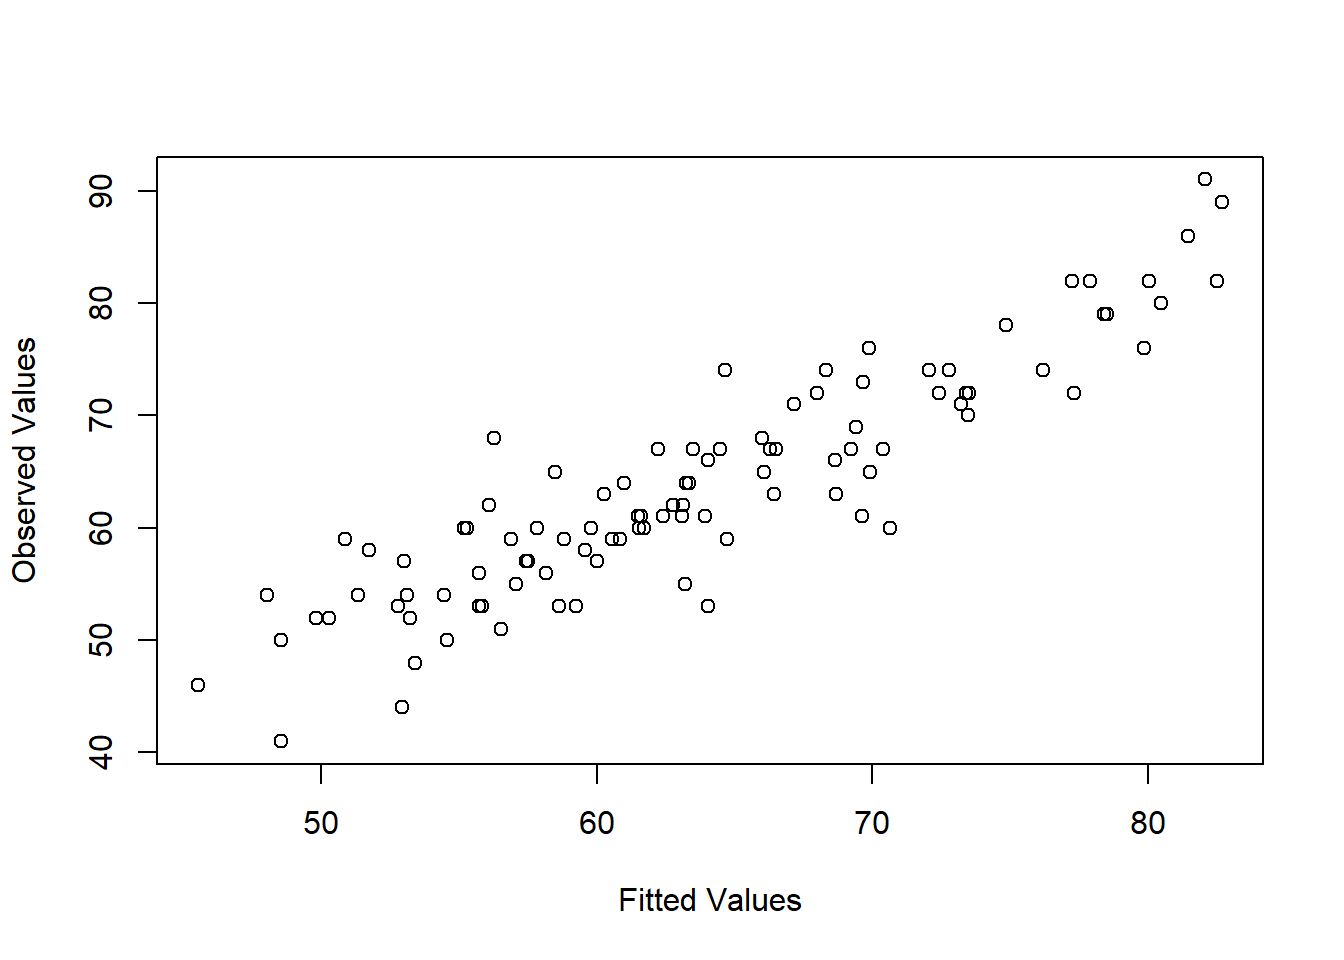 Plot of the fitted values against the observed values of the outcome variable. A straight line is what we're hoping to see here. This looks pretty good, suggesting that there's nothing grossly wrong, but there could be hidden subtle issues.